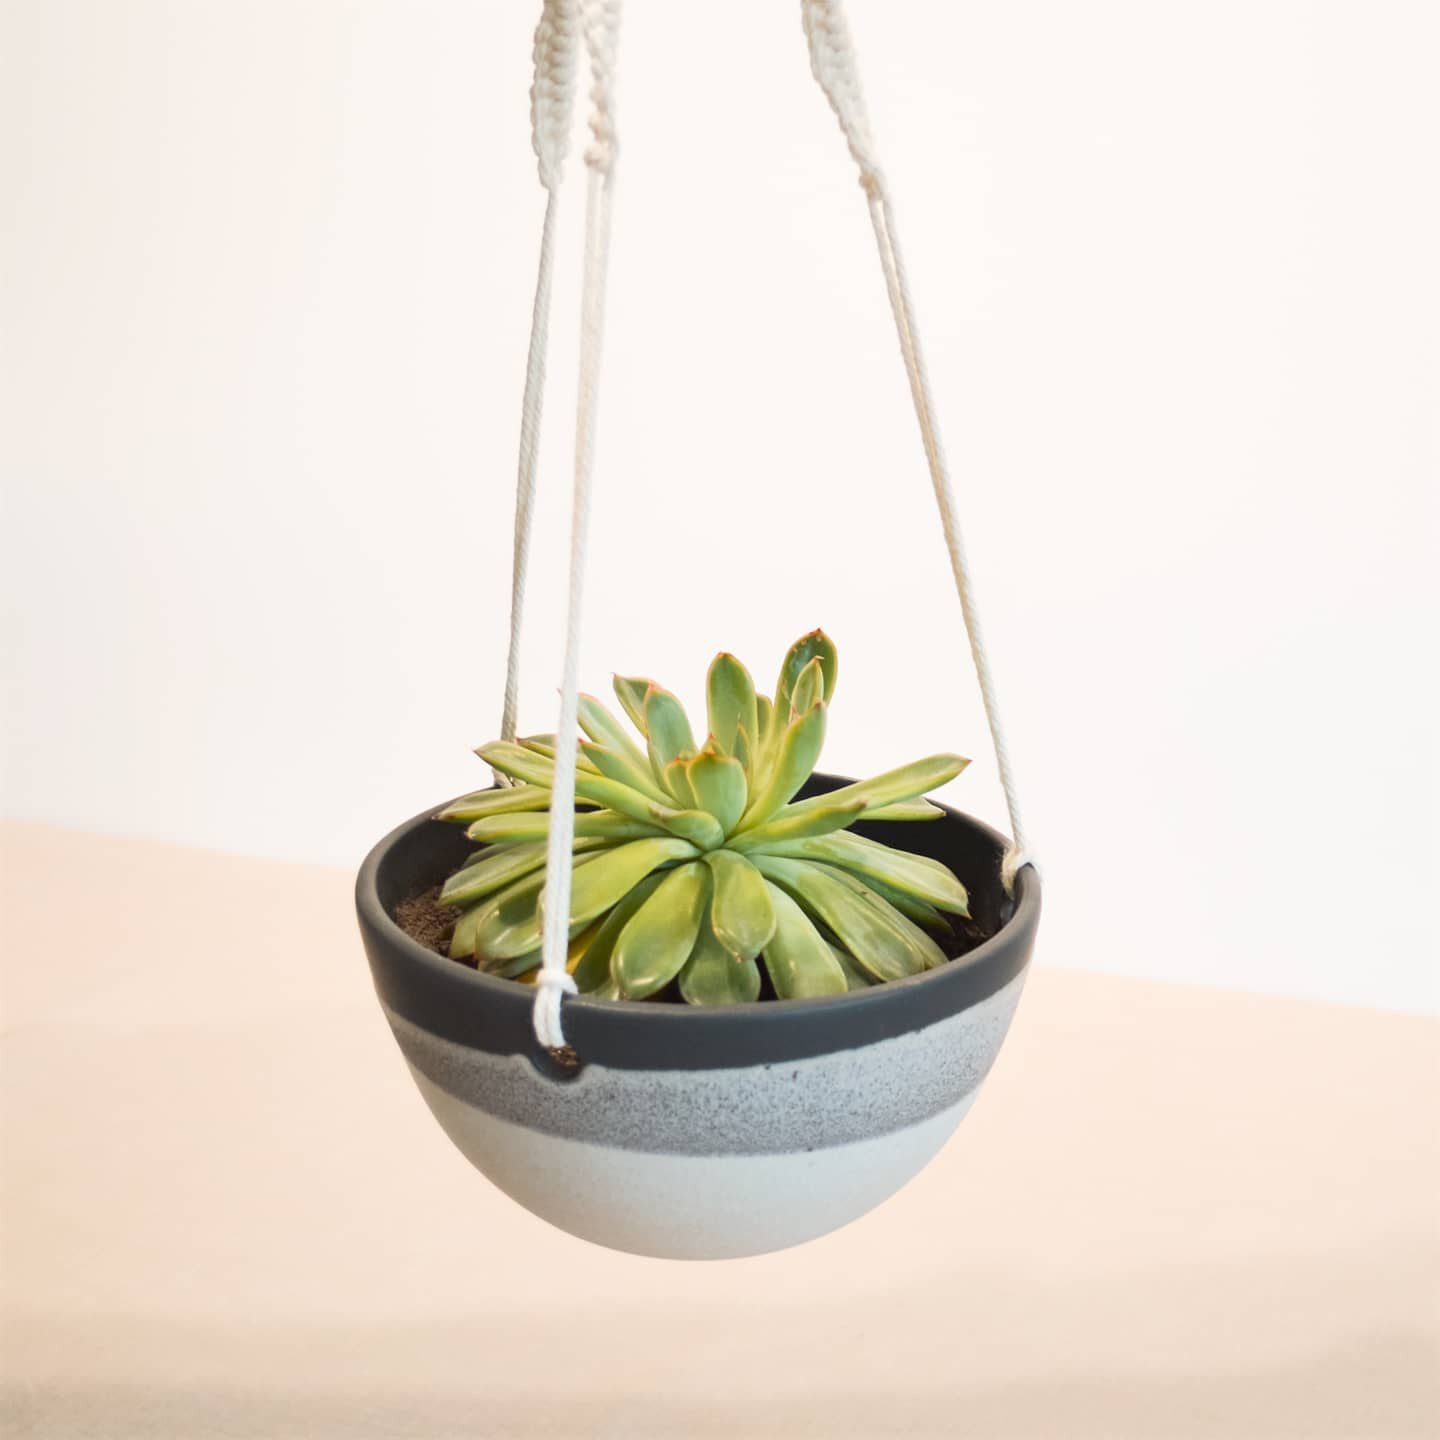 Hanging planter, decorated in our monochrome satin matte glazes.
Love hanging plants in the window, we've mostly filled ours with succulents and have some beautiful trailing varieties! 🪴 What plants do you have in your homes? 
-
#planter #hangingpla